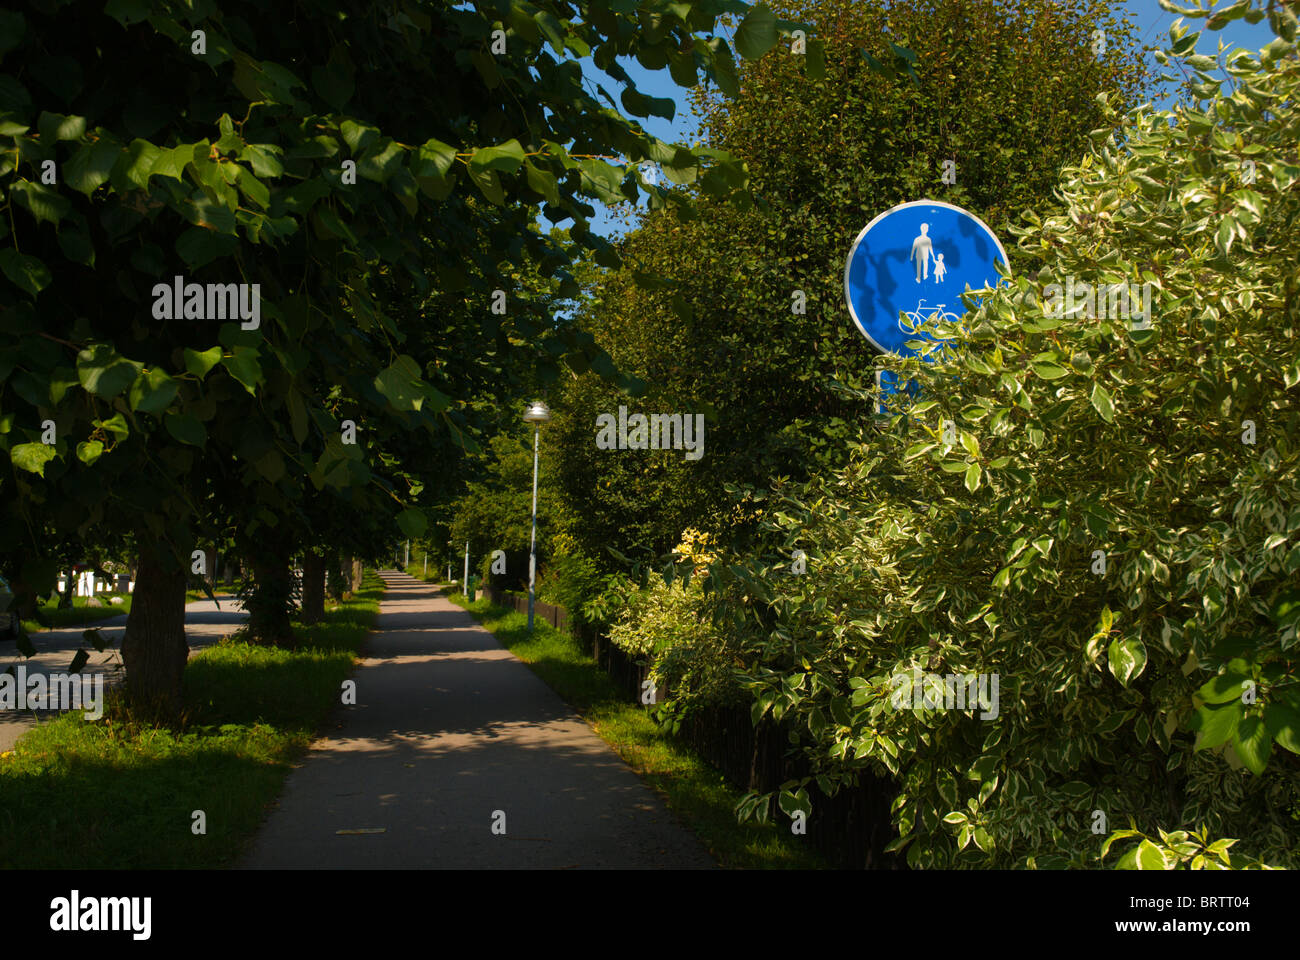 Bicycle and pedestrian path Island of Lidingö outside Stockholm Sweden Europe Stock Photo